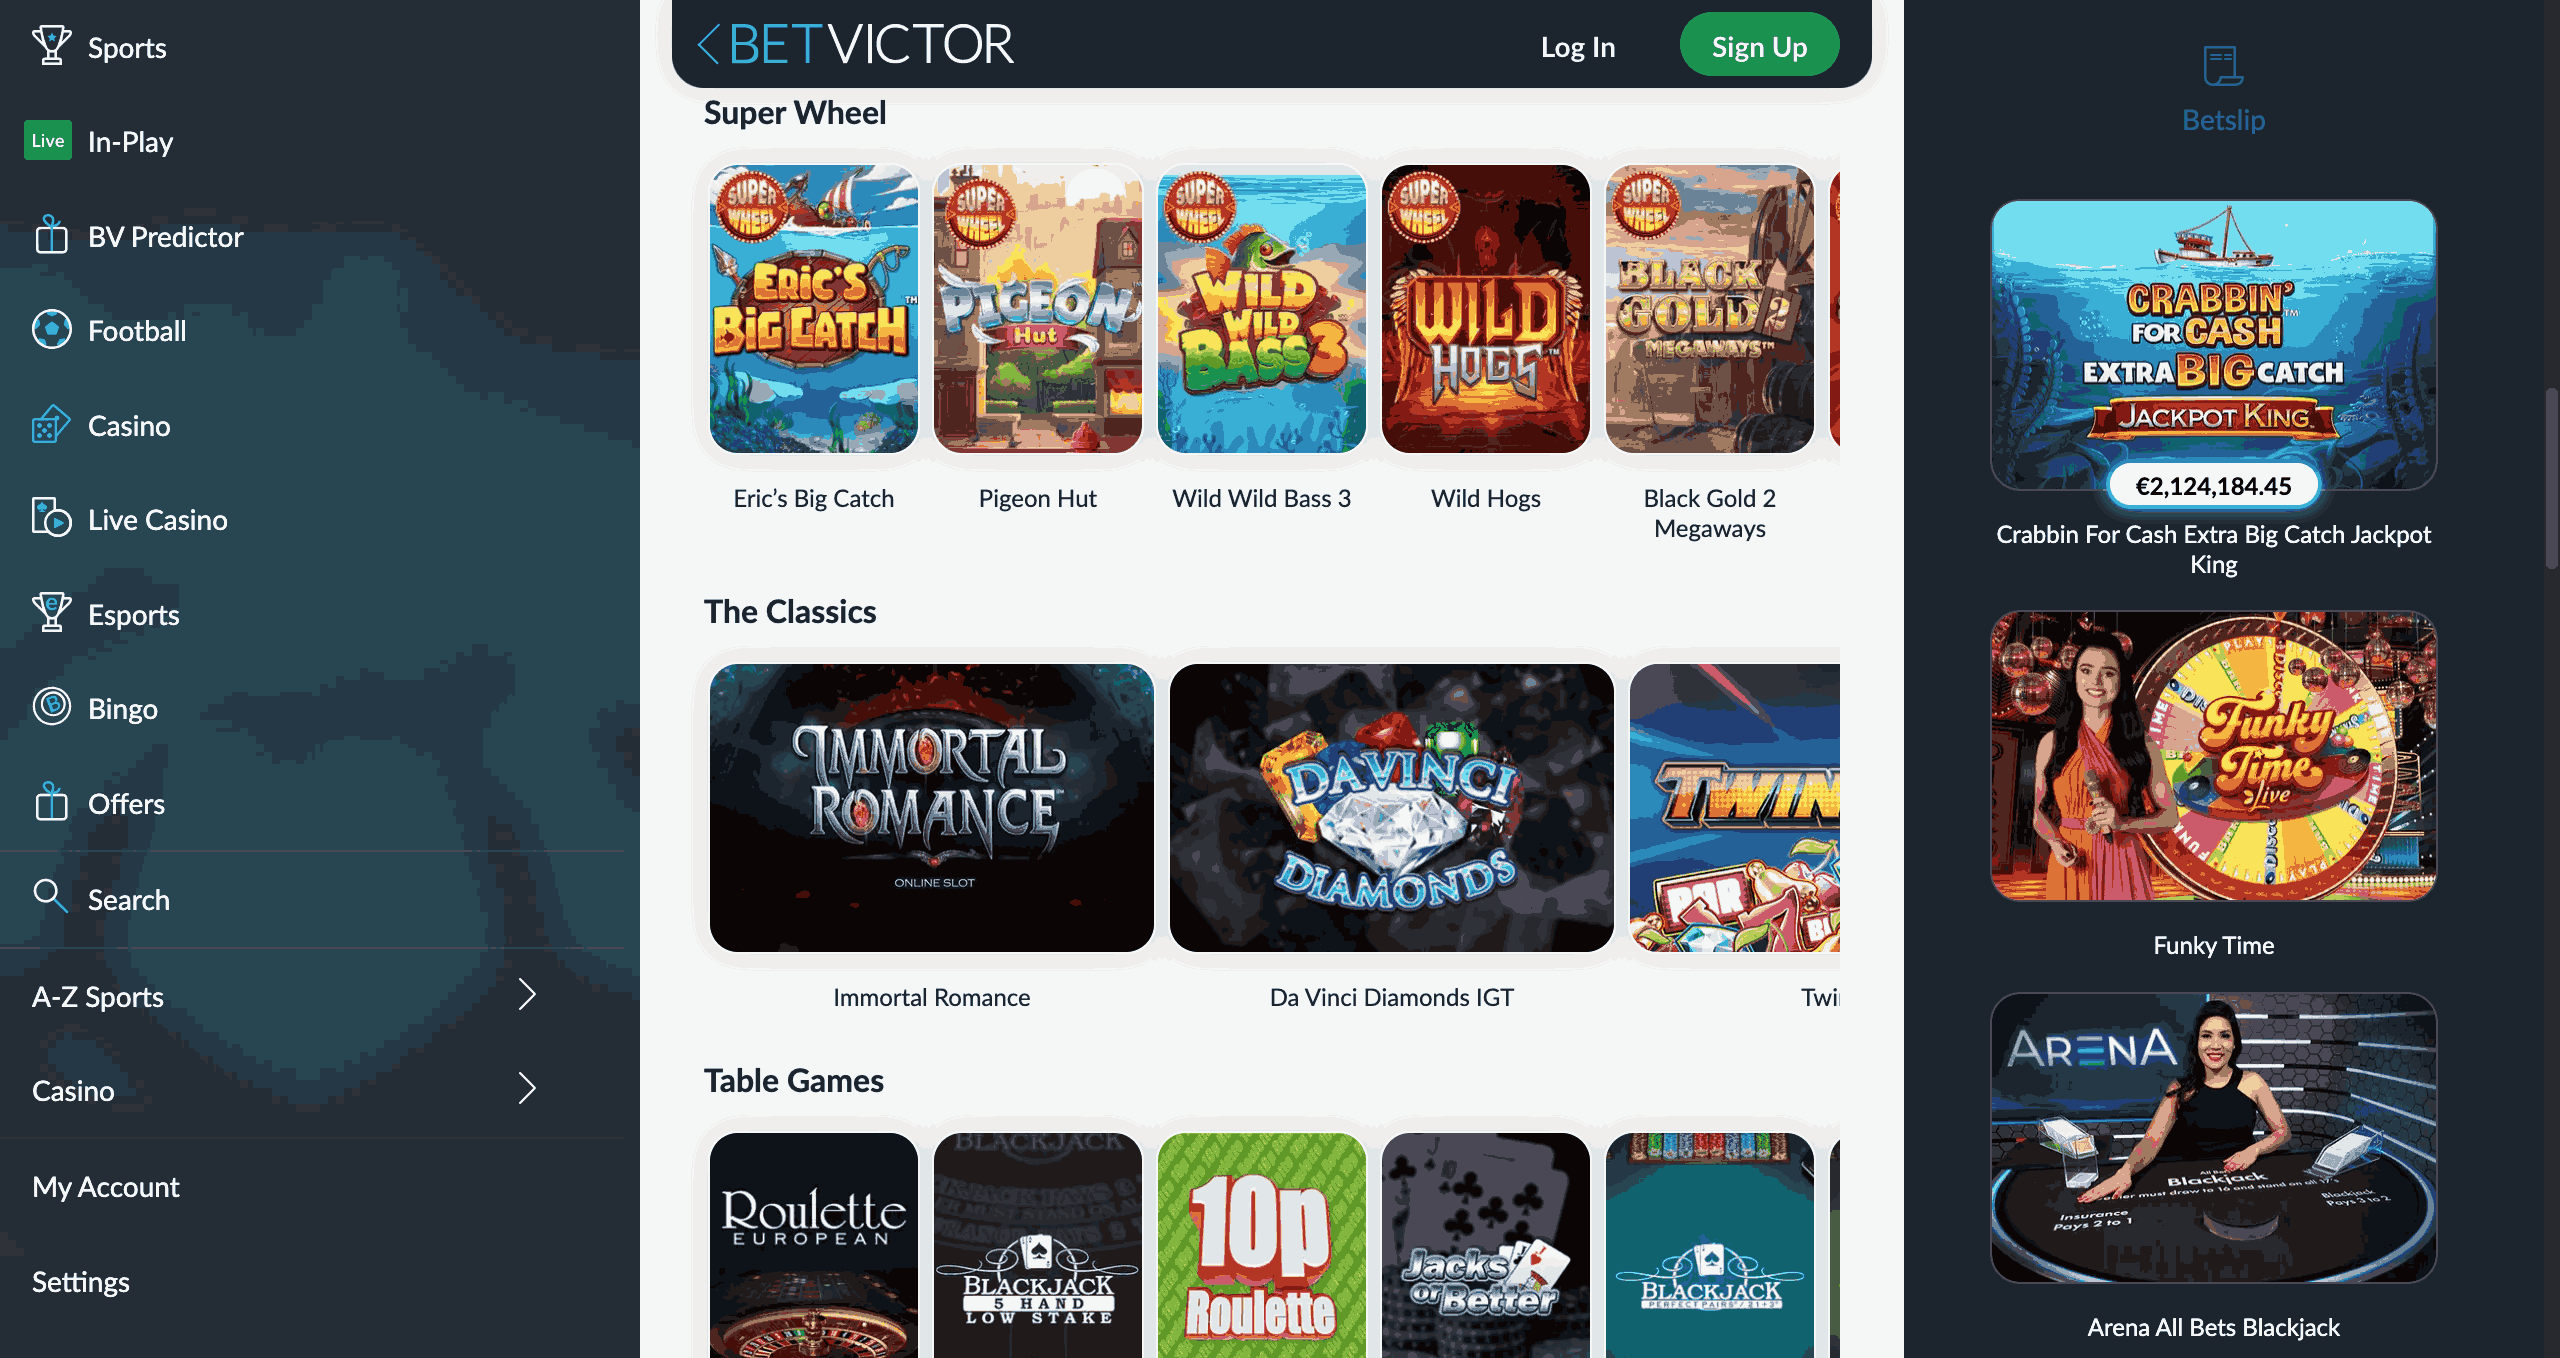 Betvictor Casino Review - 2